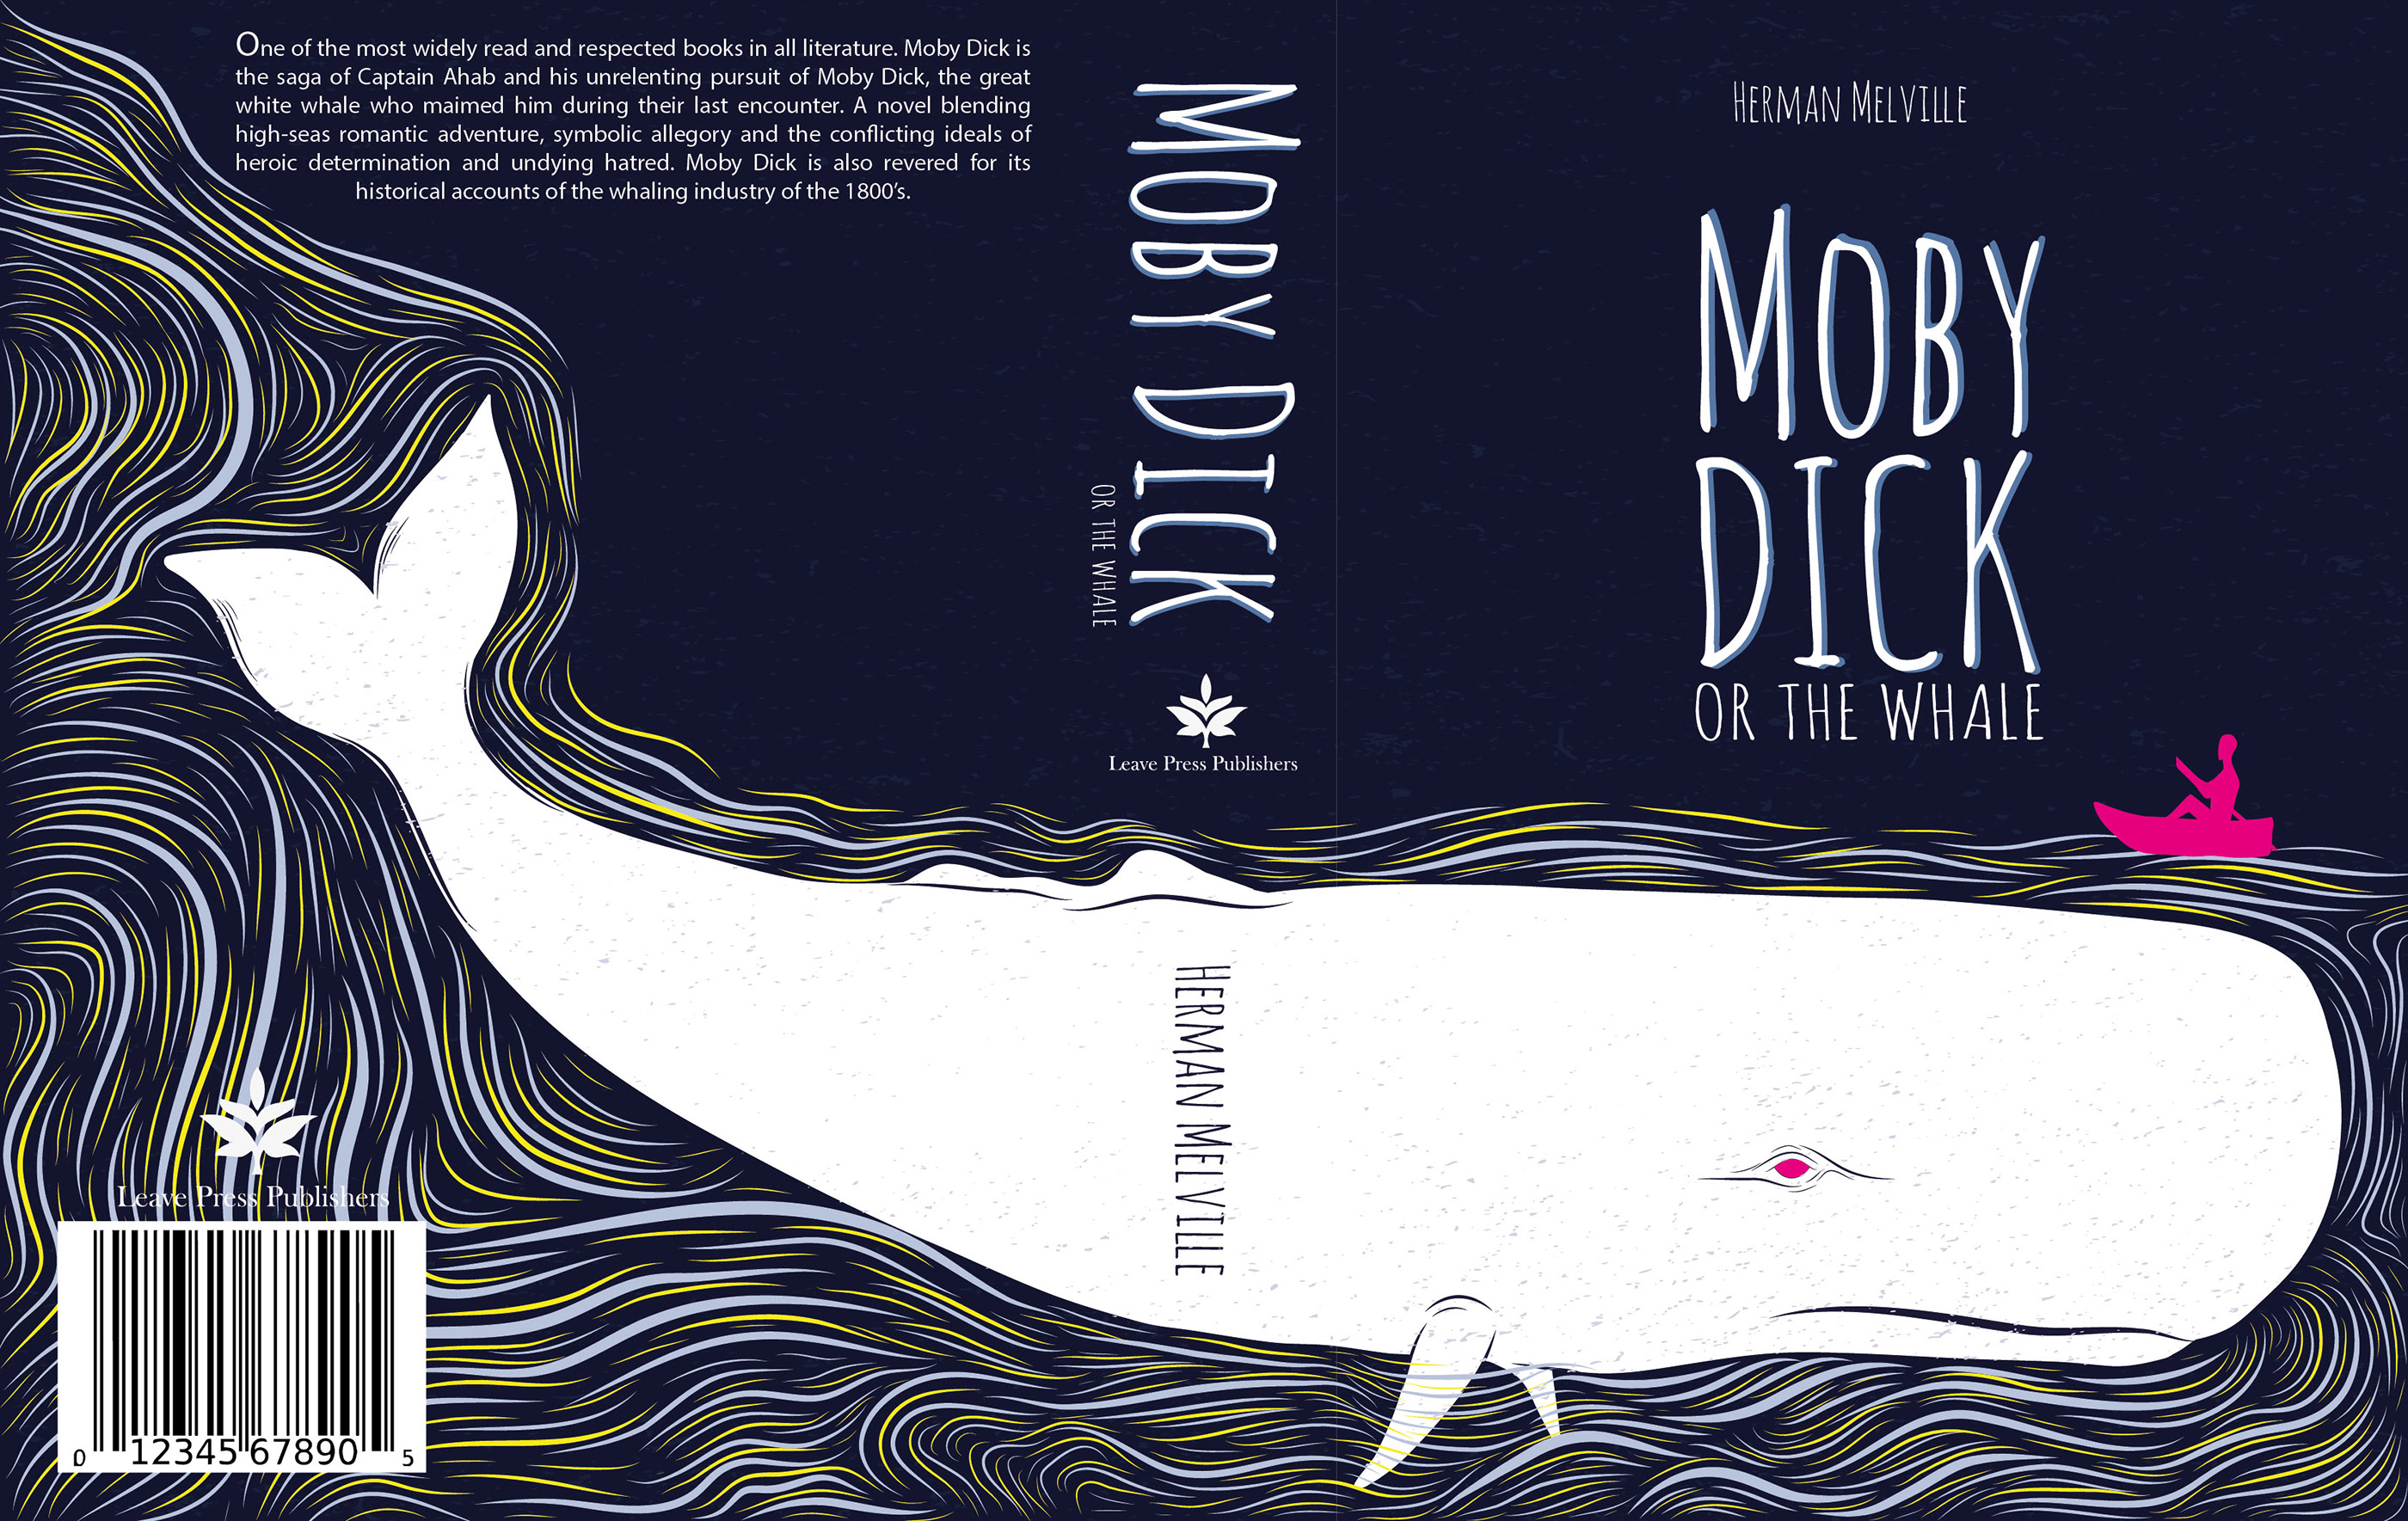 Moby dick literary movement